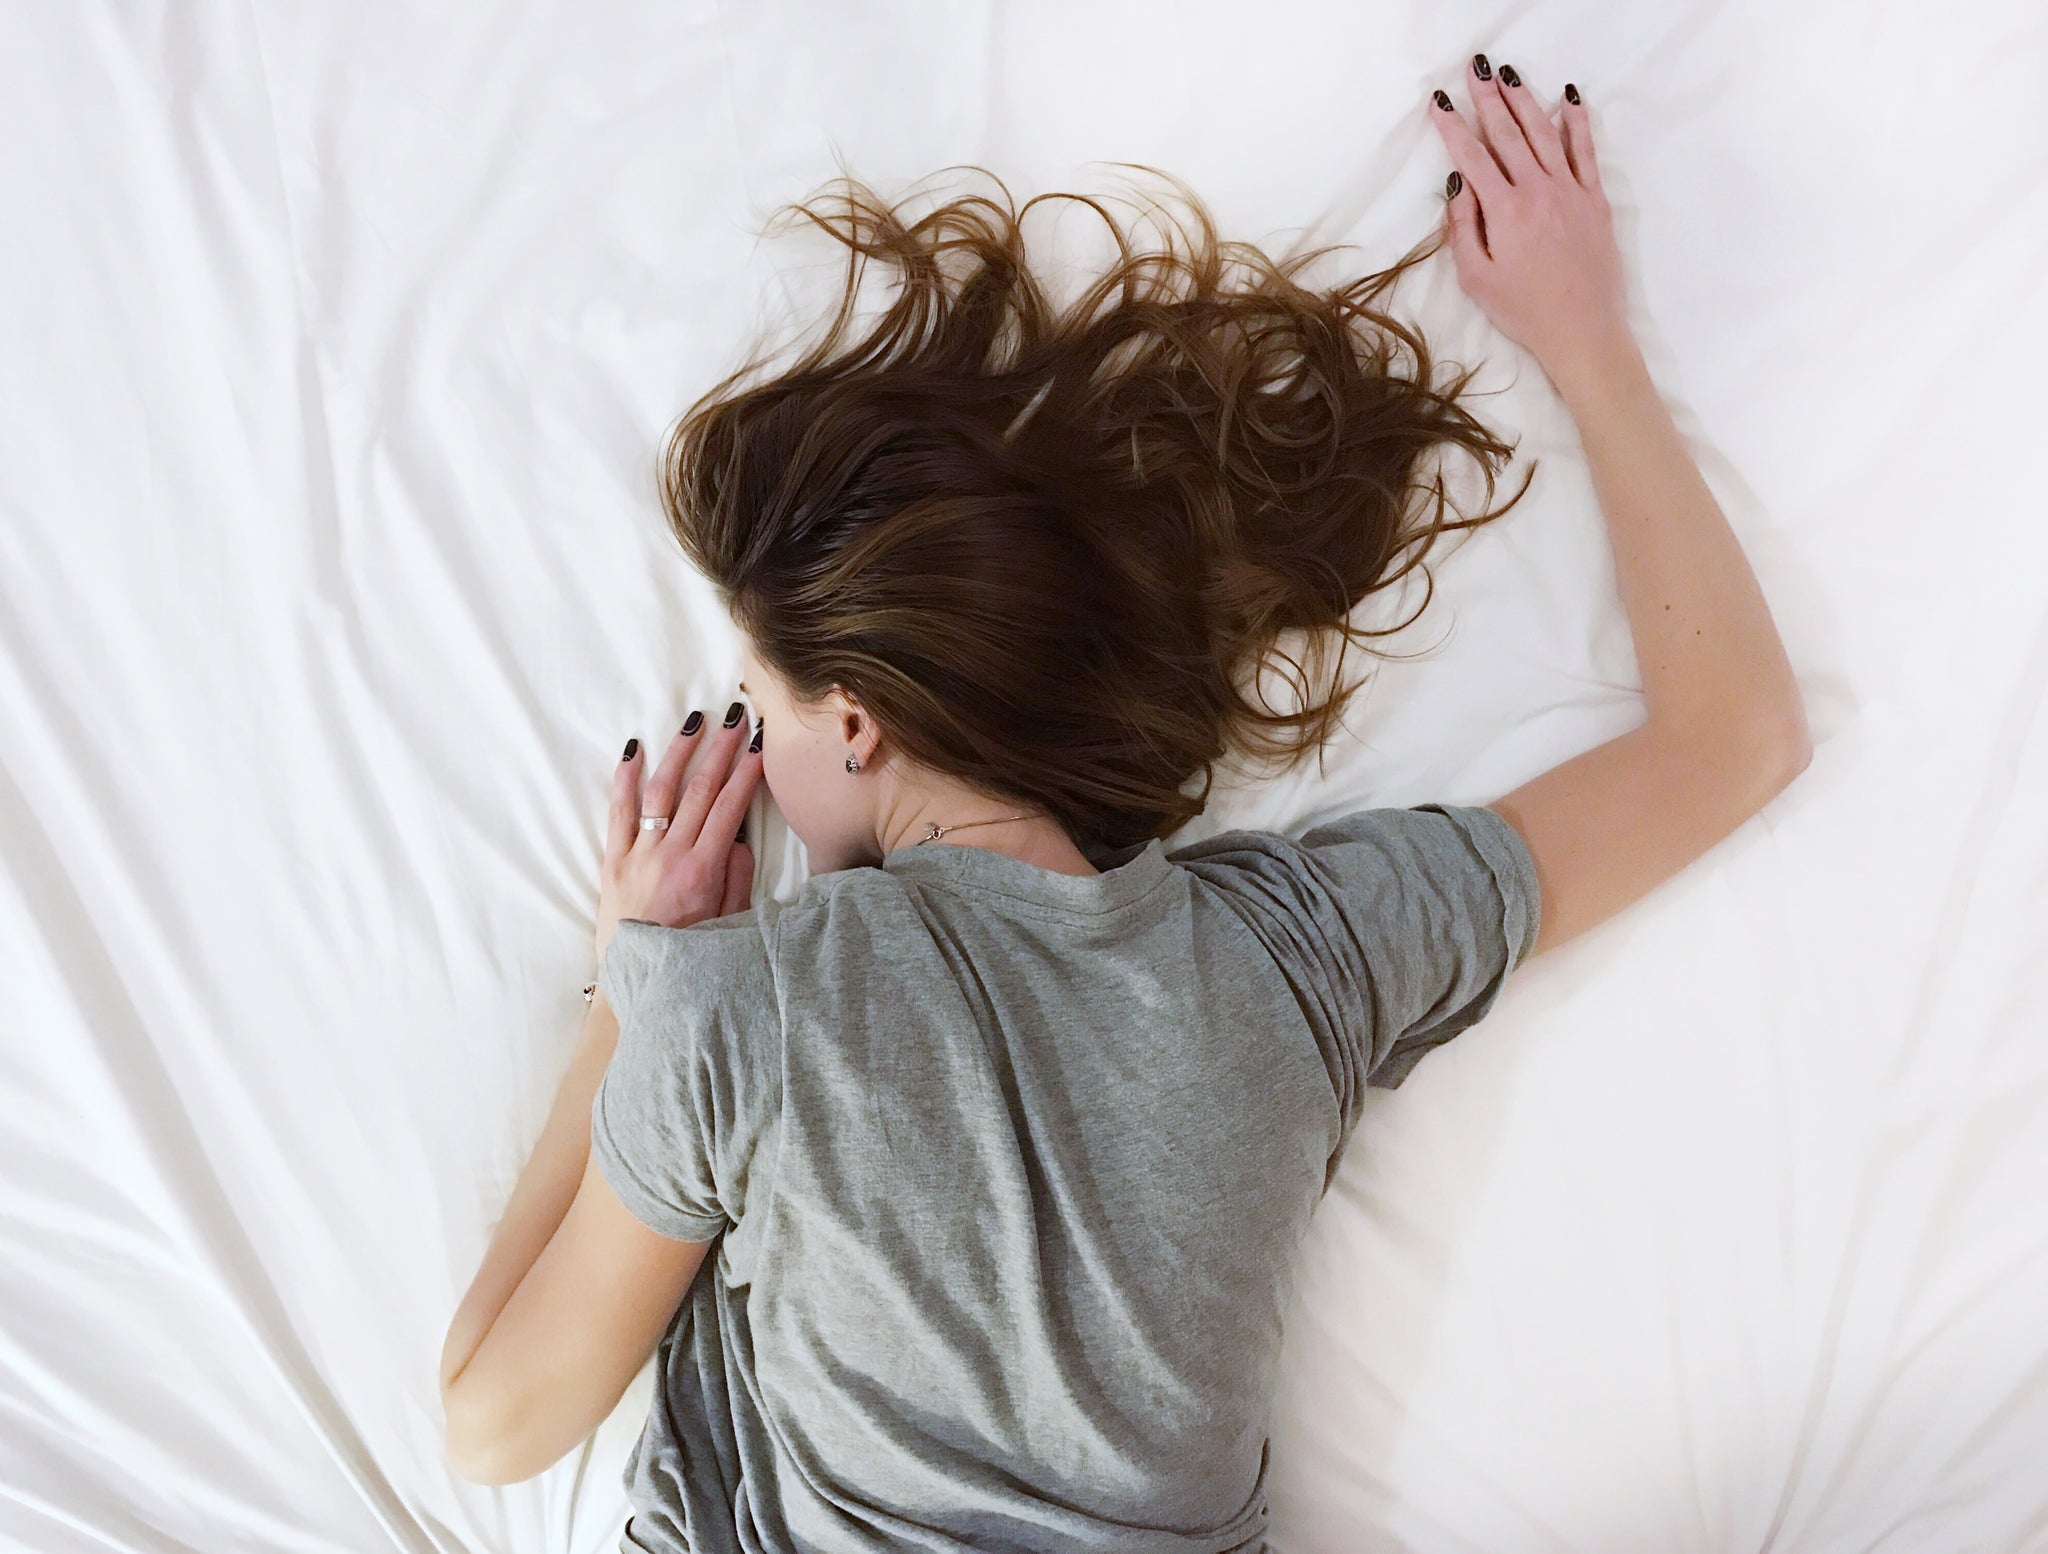 Period pain relief: woman lying face down on bed